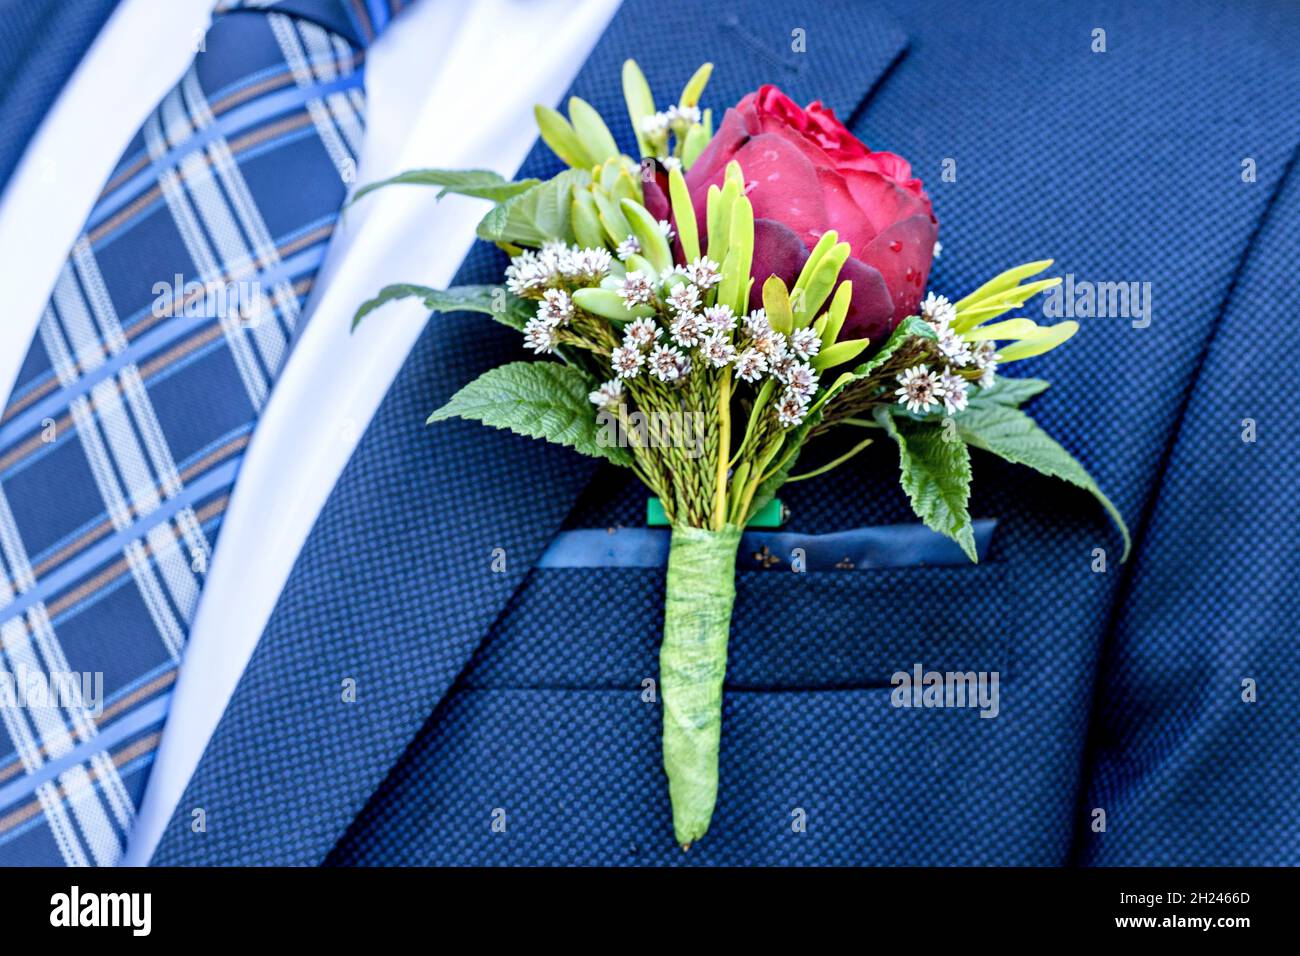 Wedding boutonniere of the groom on a blue suit. Wedding floristry. Ready for wedding ceremony. Close-up Stock Photo